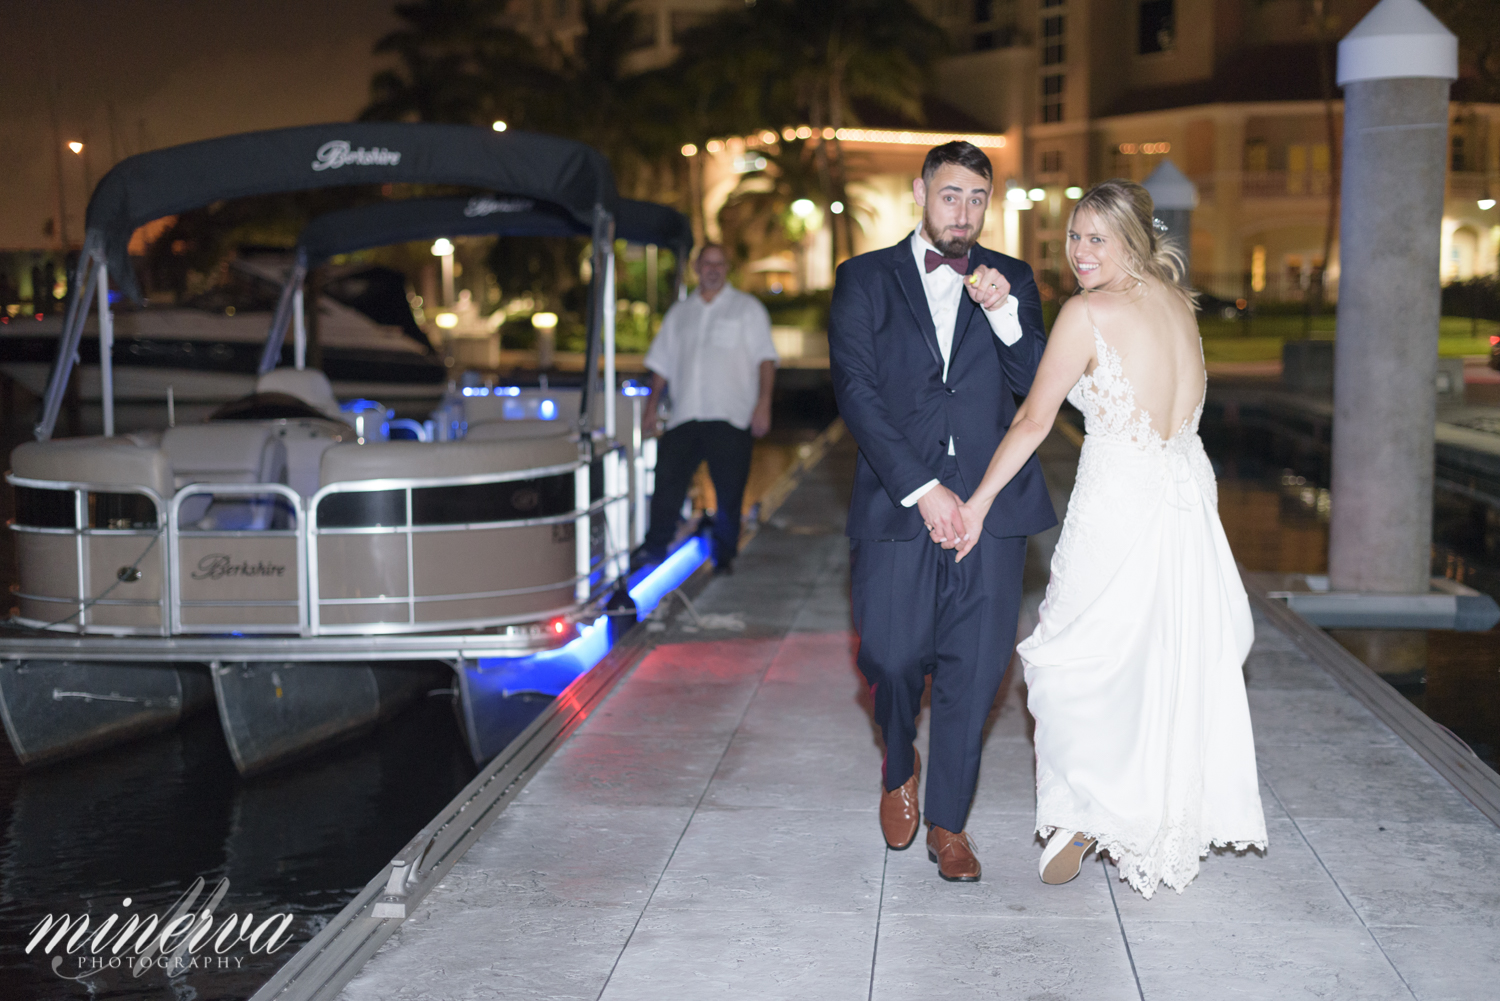 131_wedding-photography_broward-center-for-the-performing-arts_riverside-hotel_fort-lauderdale_south-florida_miami_browrad_palm-beach_orlando_central-florida